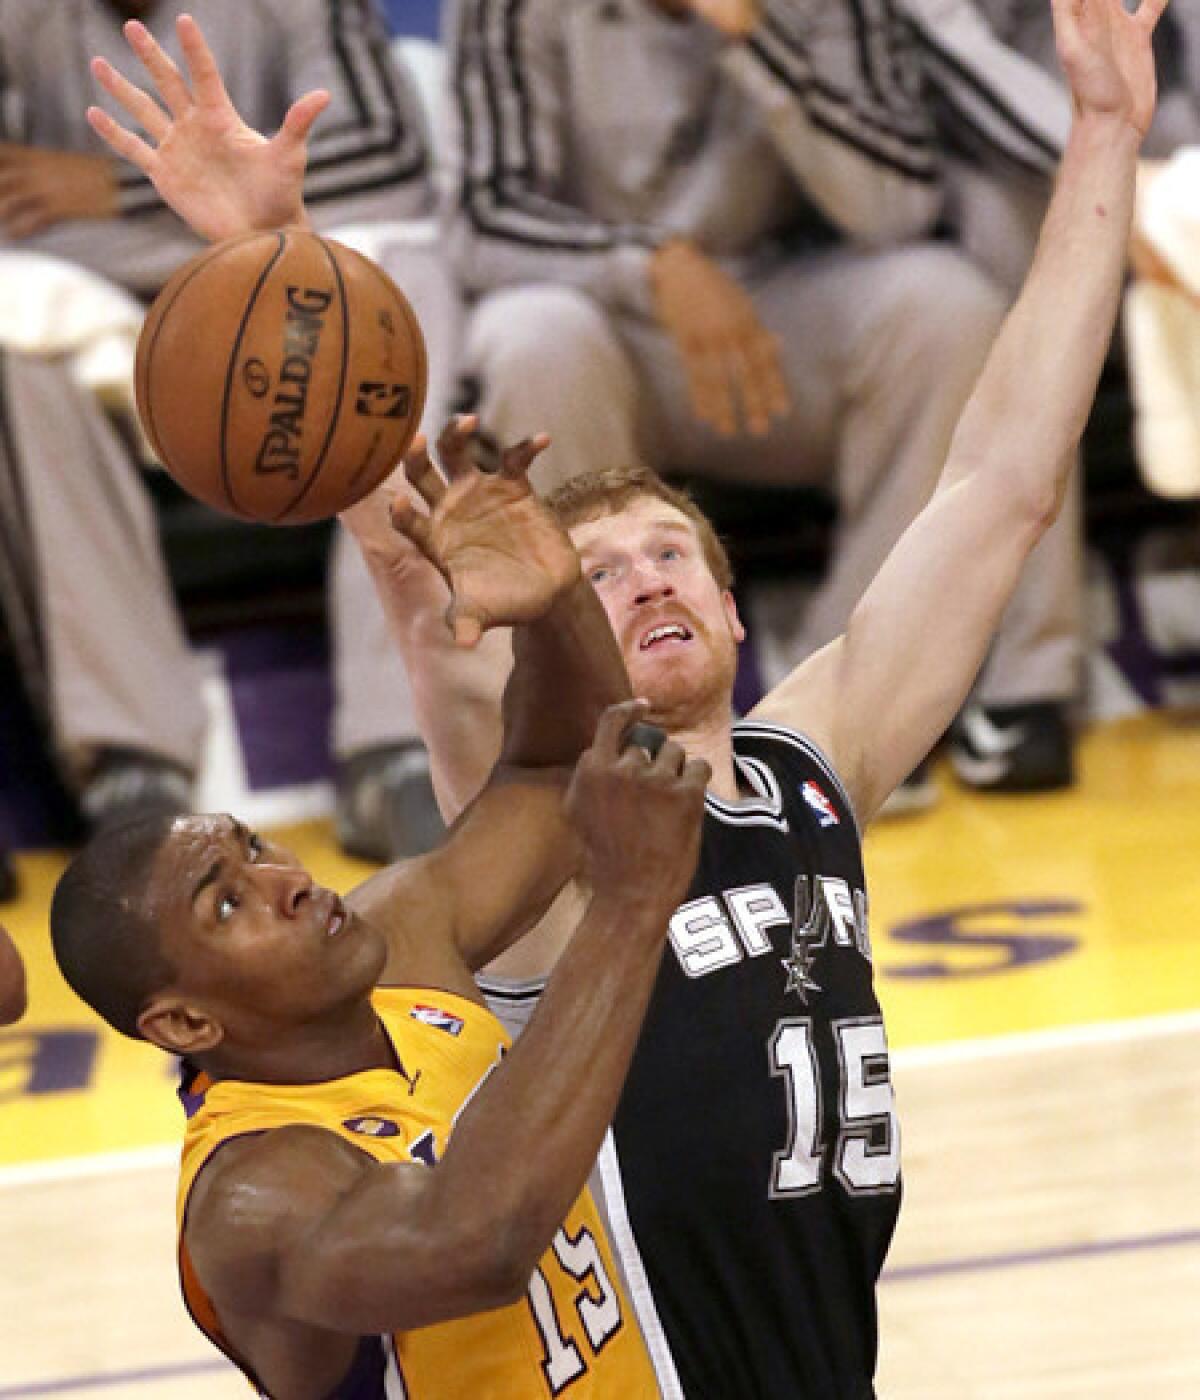 Lakers forward Metta World Peace, battling Spurs forward Matt Bonner for a rebound in Game 3, will join the growing list of injured Lakers expected to miss Game 4 on Sunday.